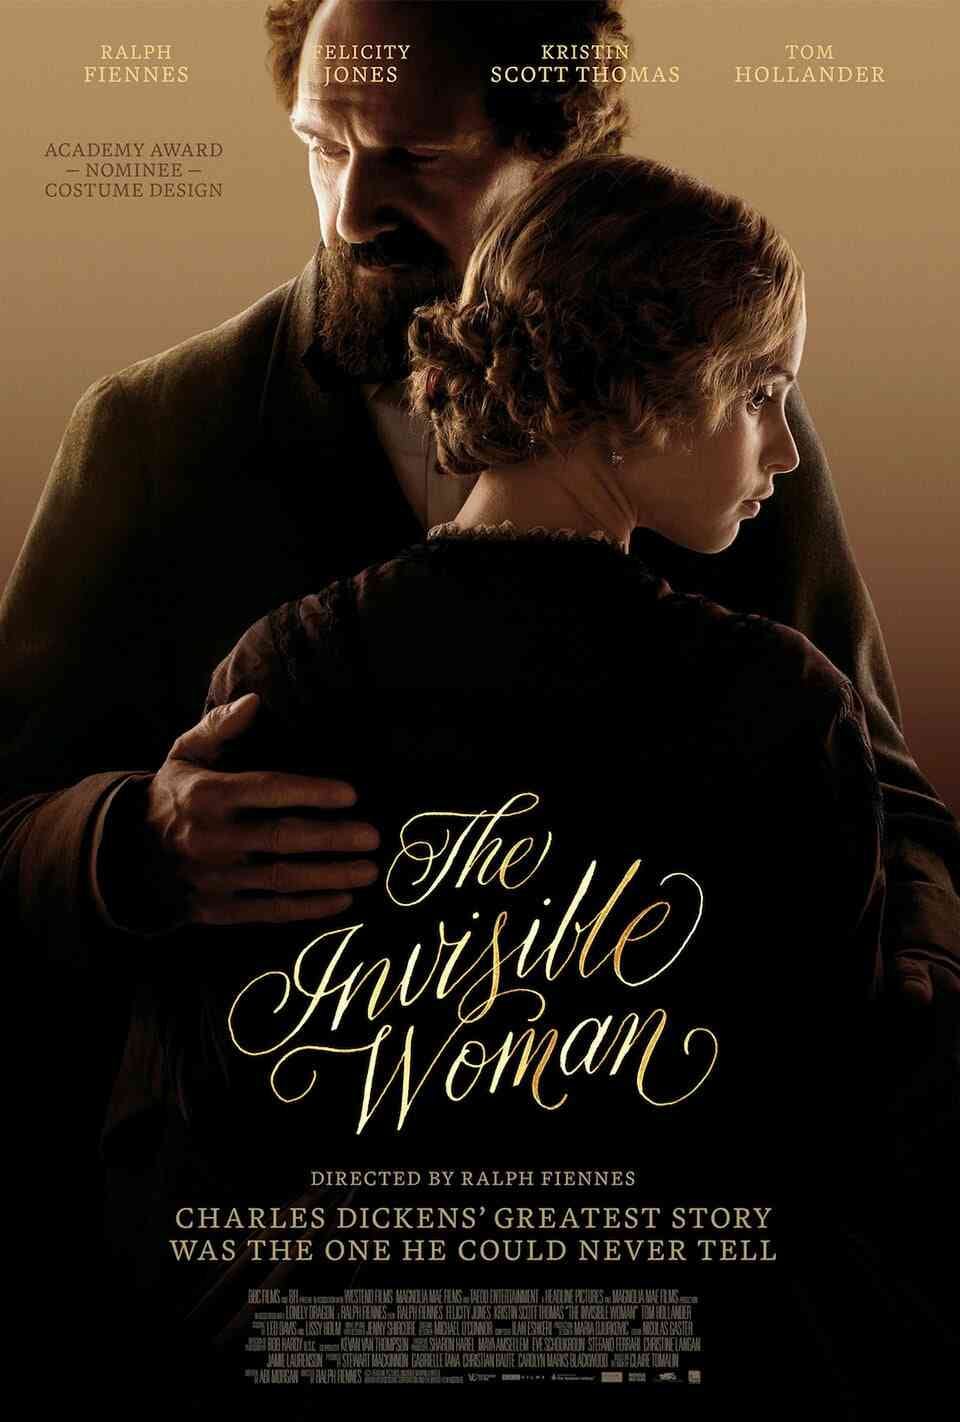 Read The Invisible Woman screenplay.